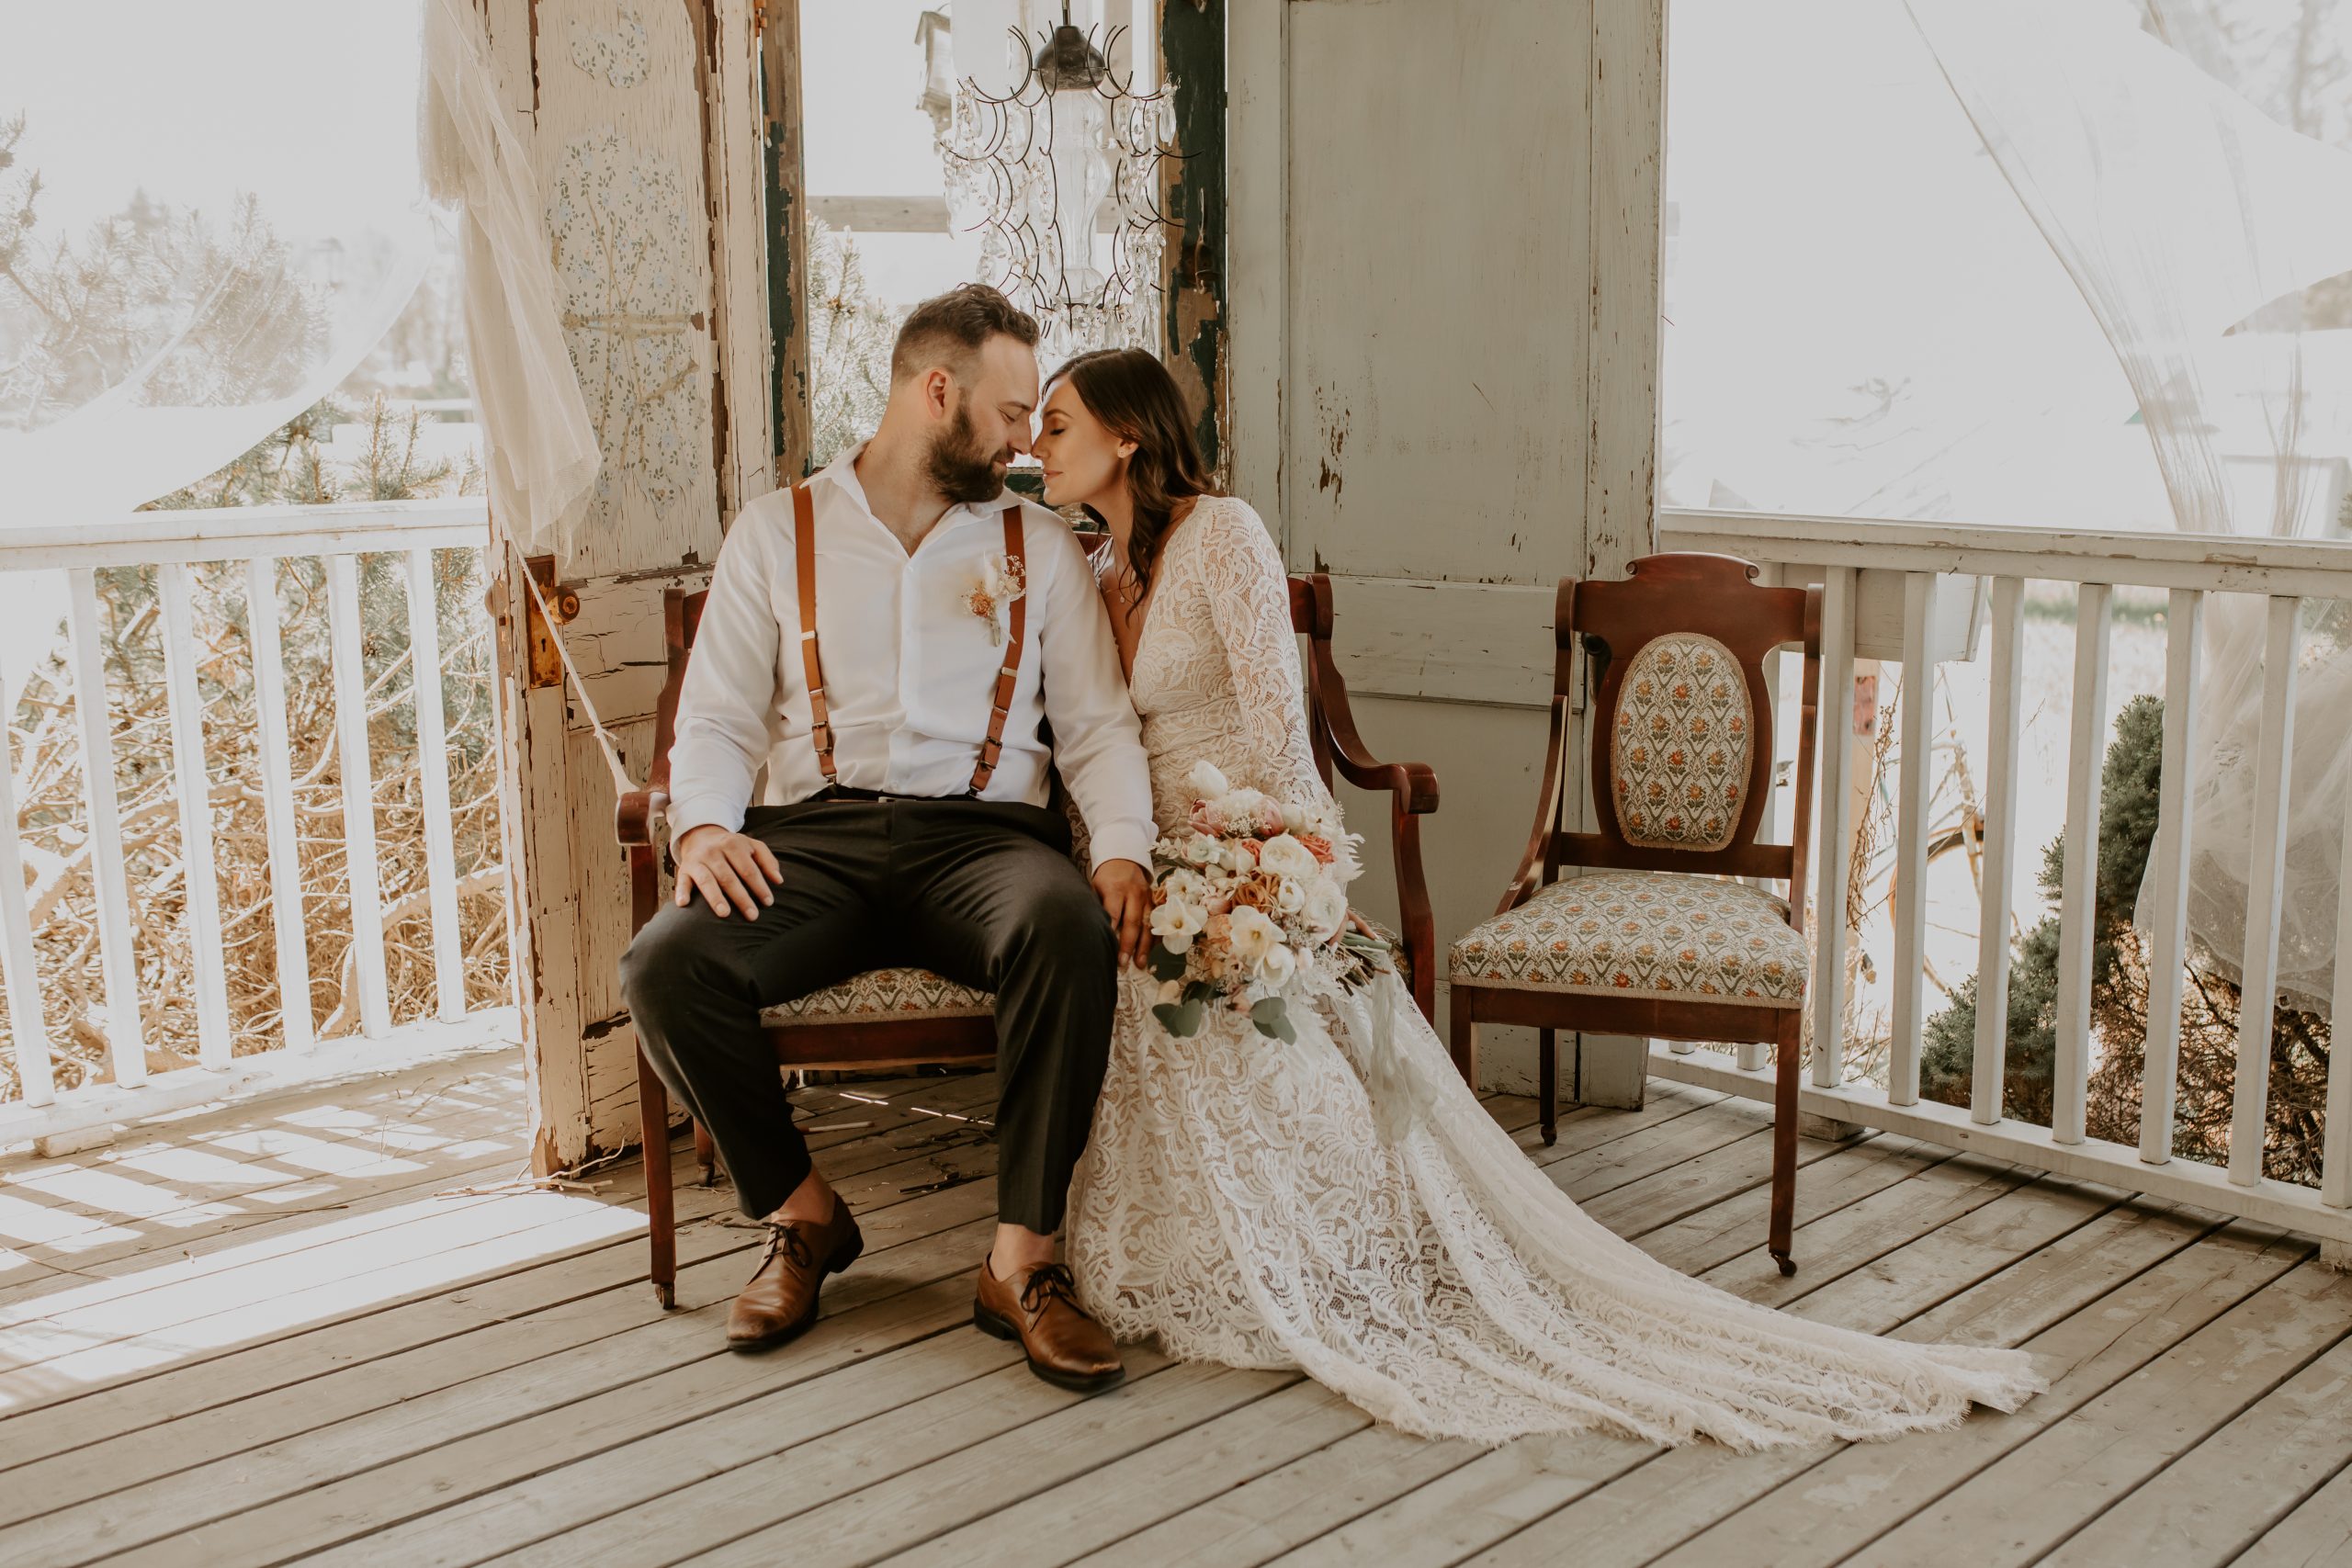 The Wedding Ring, Memories Bridal, Barrie Ontario Gown Shop, Sarah Martin Photoartistry, Barrie Ontario Wedding Photographer, Bride and Groom sitting on white porch looking at each othe